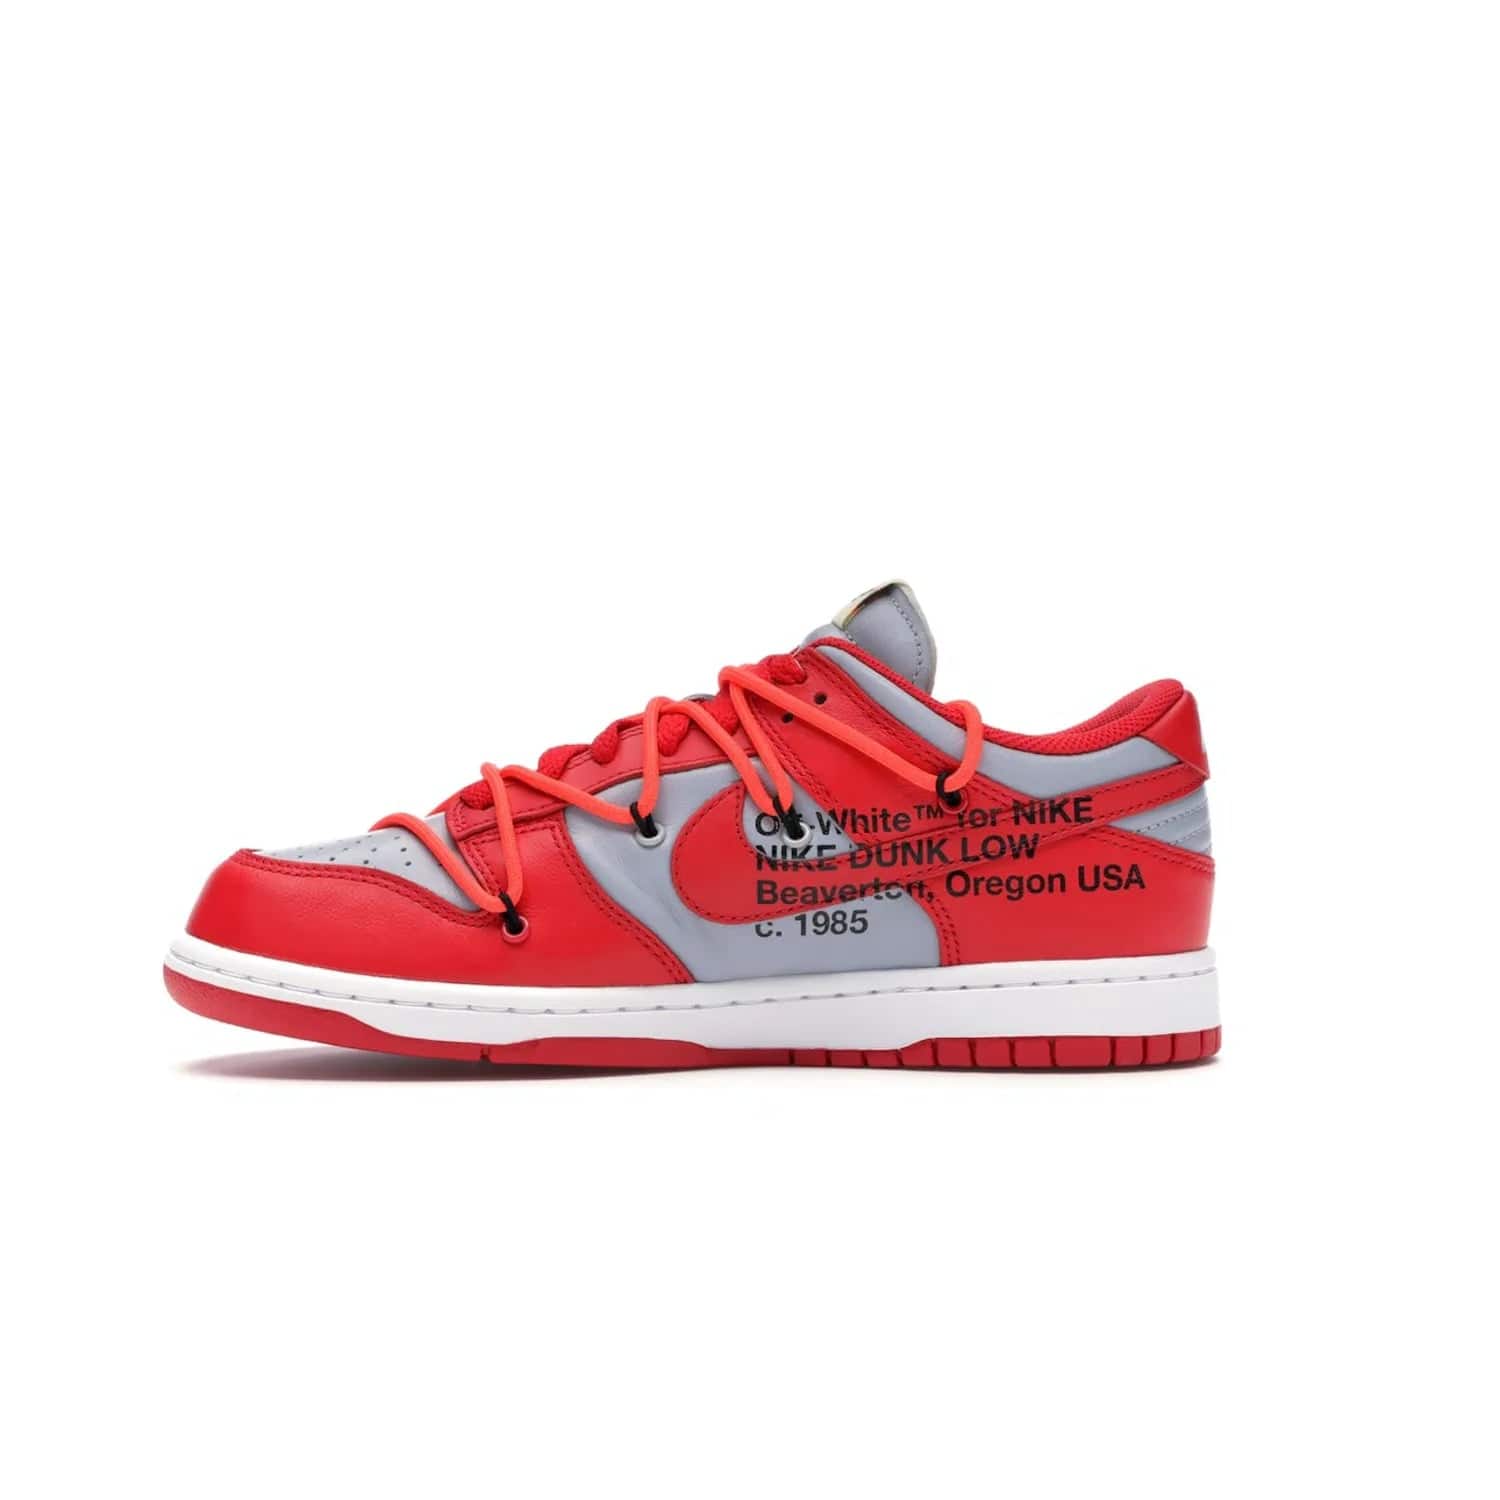 Nike Dunk Low Off-White University Red - Image 19 - Only at www.BallersClubKickz.com - The Nike Dunk Low Off-White University Red offers tribute to classic Nike Basketball silhouettes. Features include wolf grey leather, university red overlays, zip-ties, and Off-White text. Perfect for any sneaker fan, these stylish sneakers released in December of 2019.